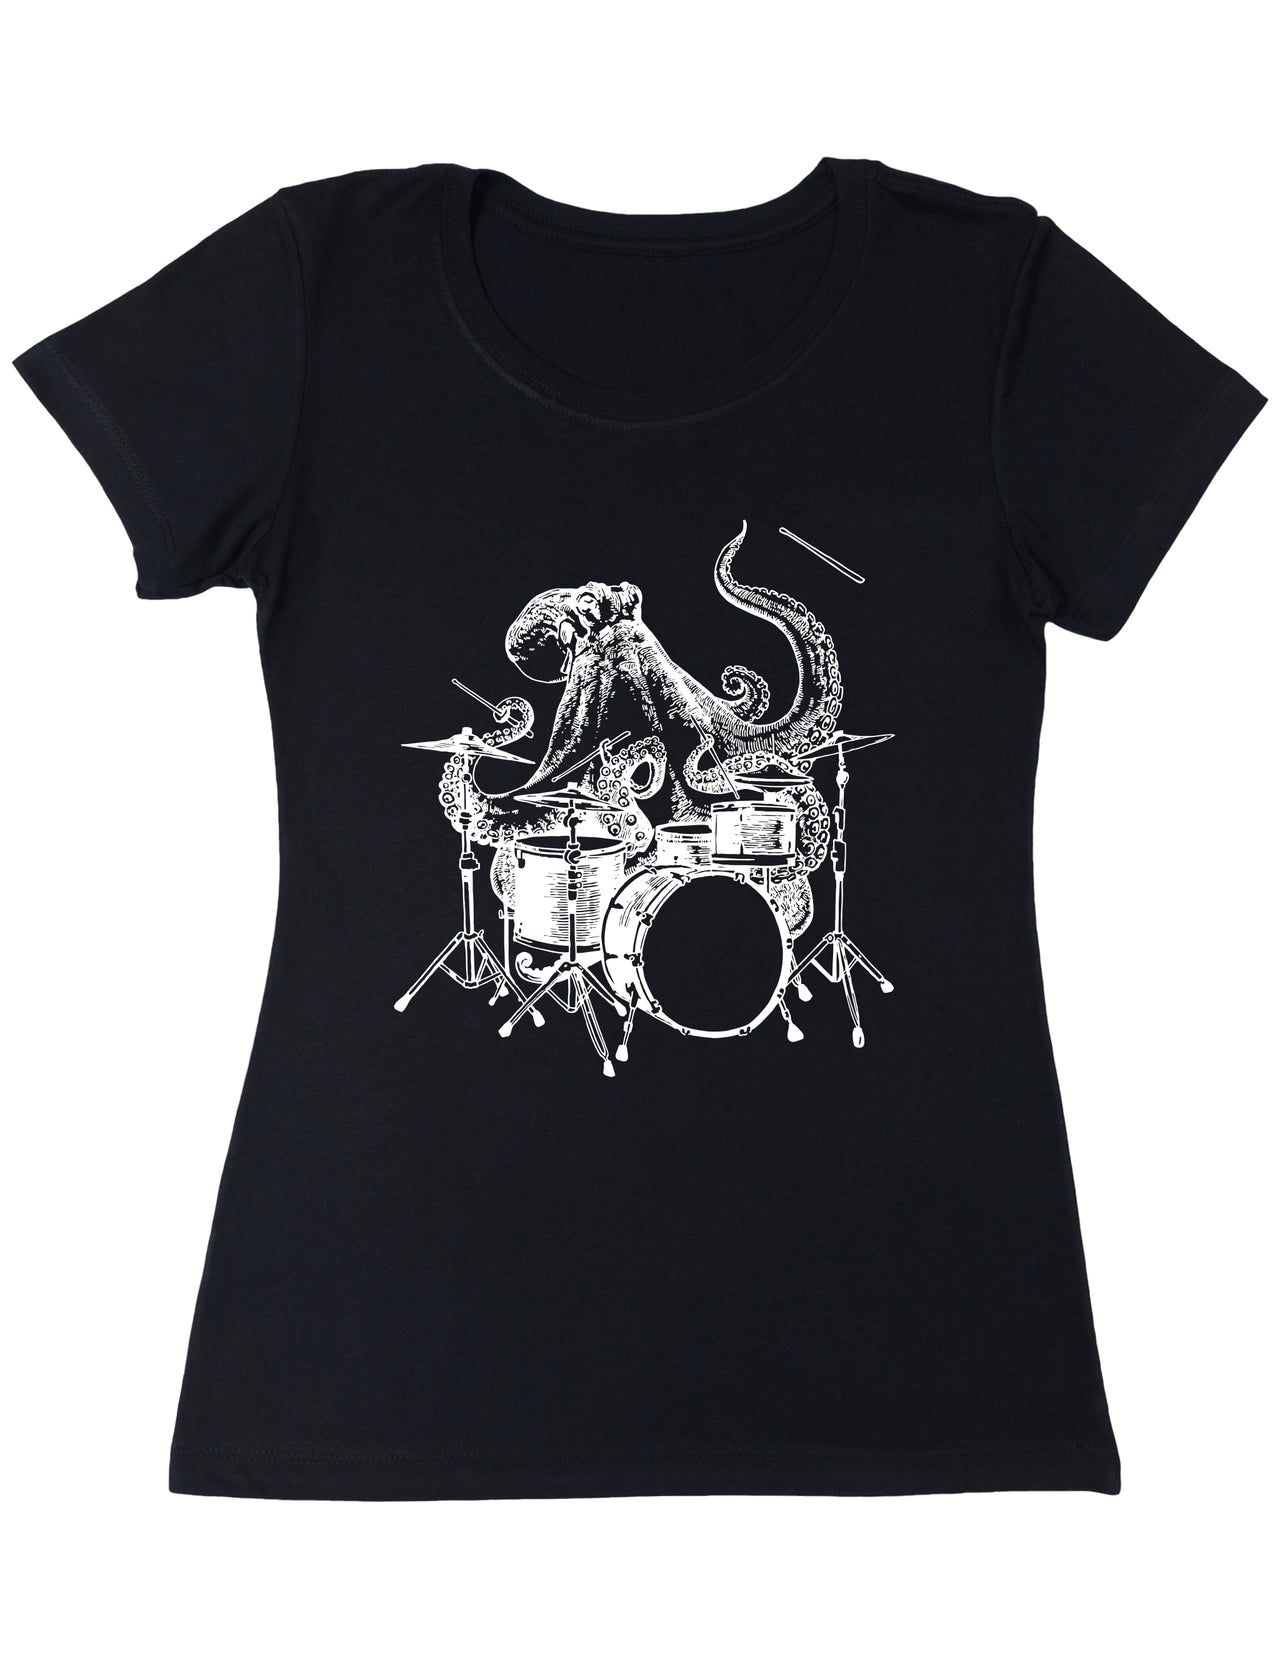 SEEMBO Octopus Playing Drums Funny Drummer Musician Music Band Women Poly-Cotton T-Shirt